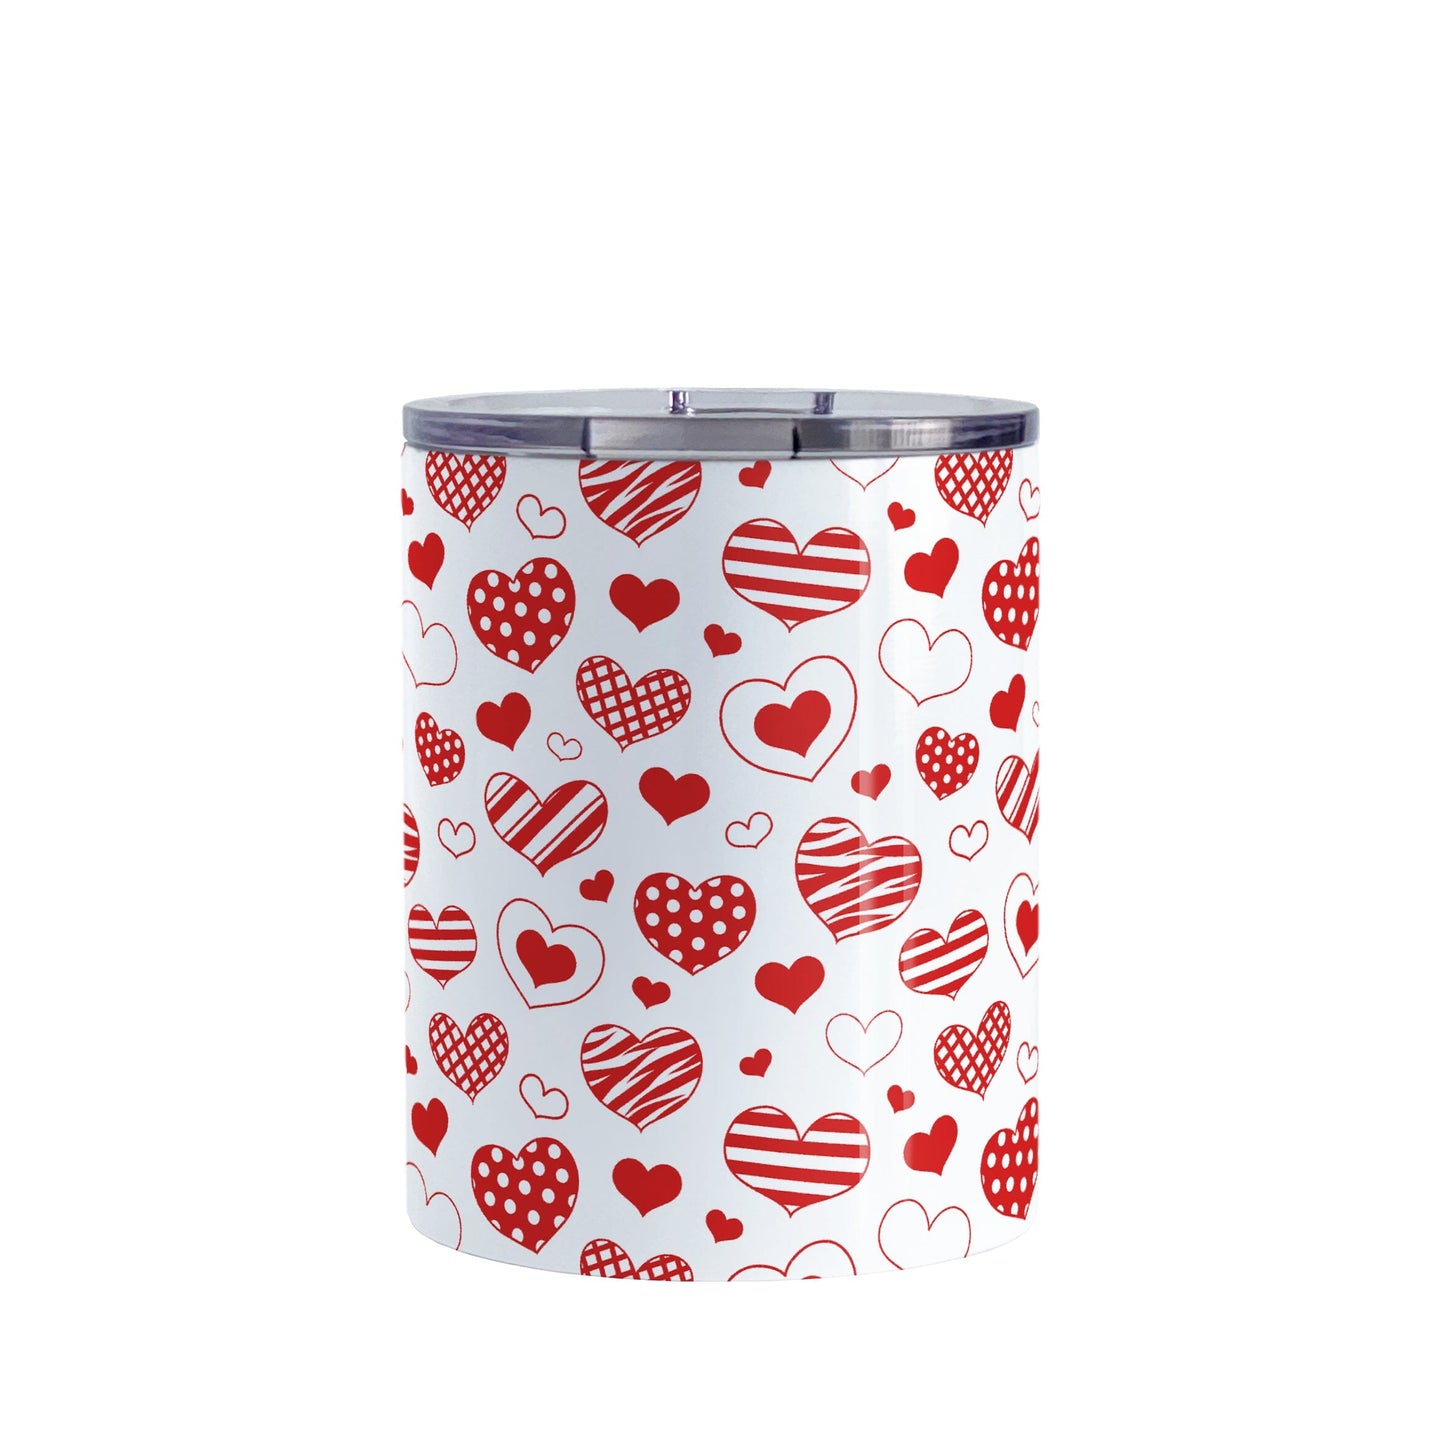 Red Heart Doodles Tumbler Cup (10oz) at Amy's Coffee Mugs. A stainless steel tumbler cup designed with hand-drawn red heart doodles in a pattern that wraps around the cup. This cute heart pattern is perfect for Valentine's Day or for anyone who loves hearts and young-at-heart drawings. 